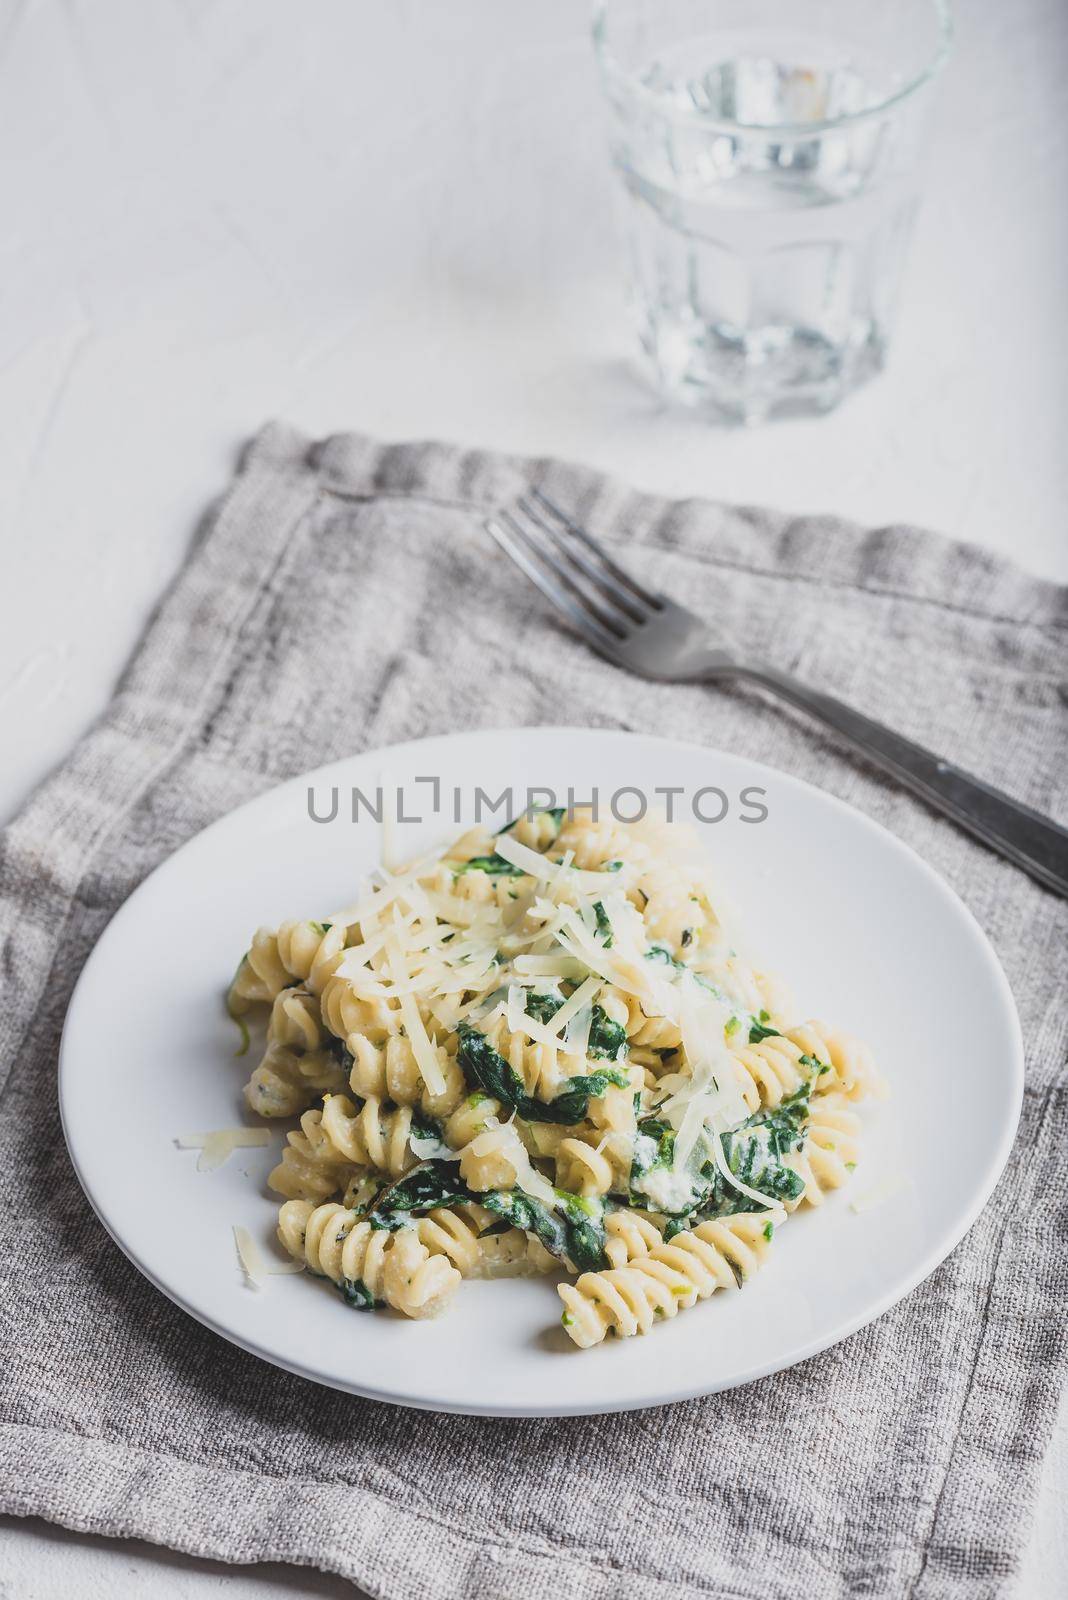 Creamy Spinach Pasta with Ricotta and Parmesan on White Plate